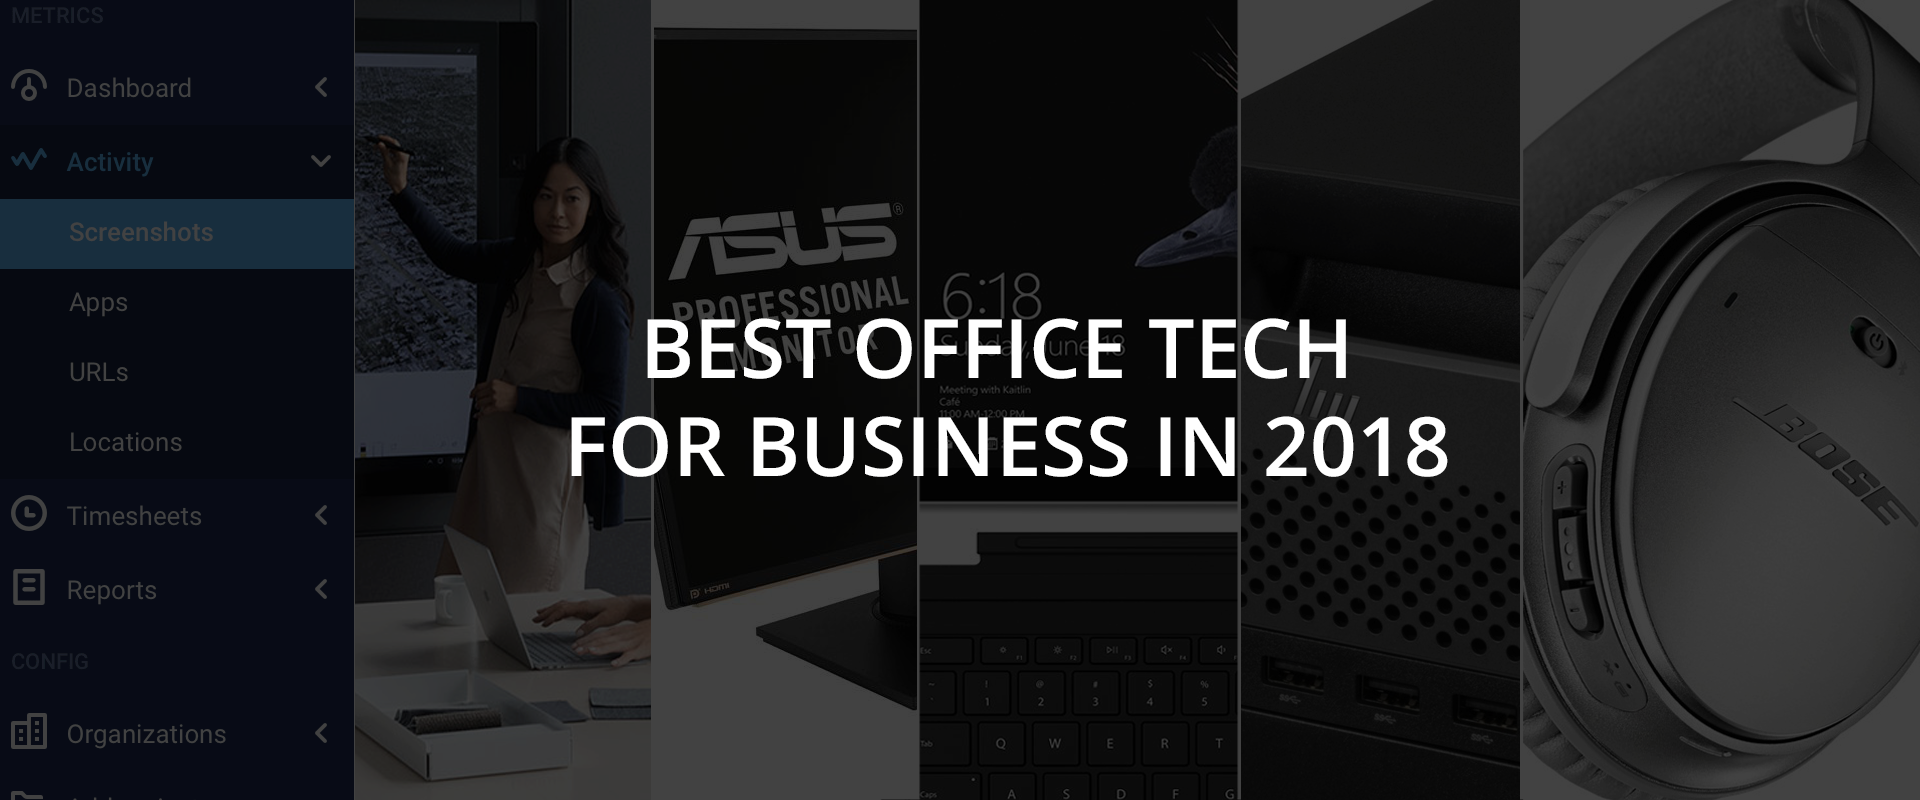 Best Office Tech for 2018 | Praxis Technologies Digital Marketing and Branding Agency